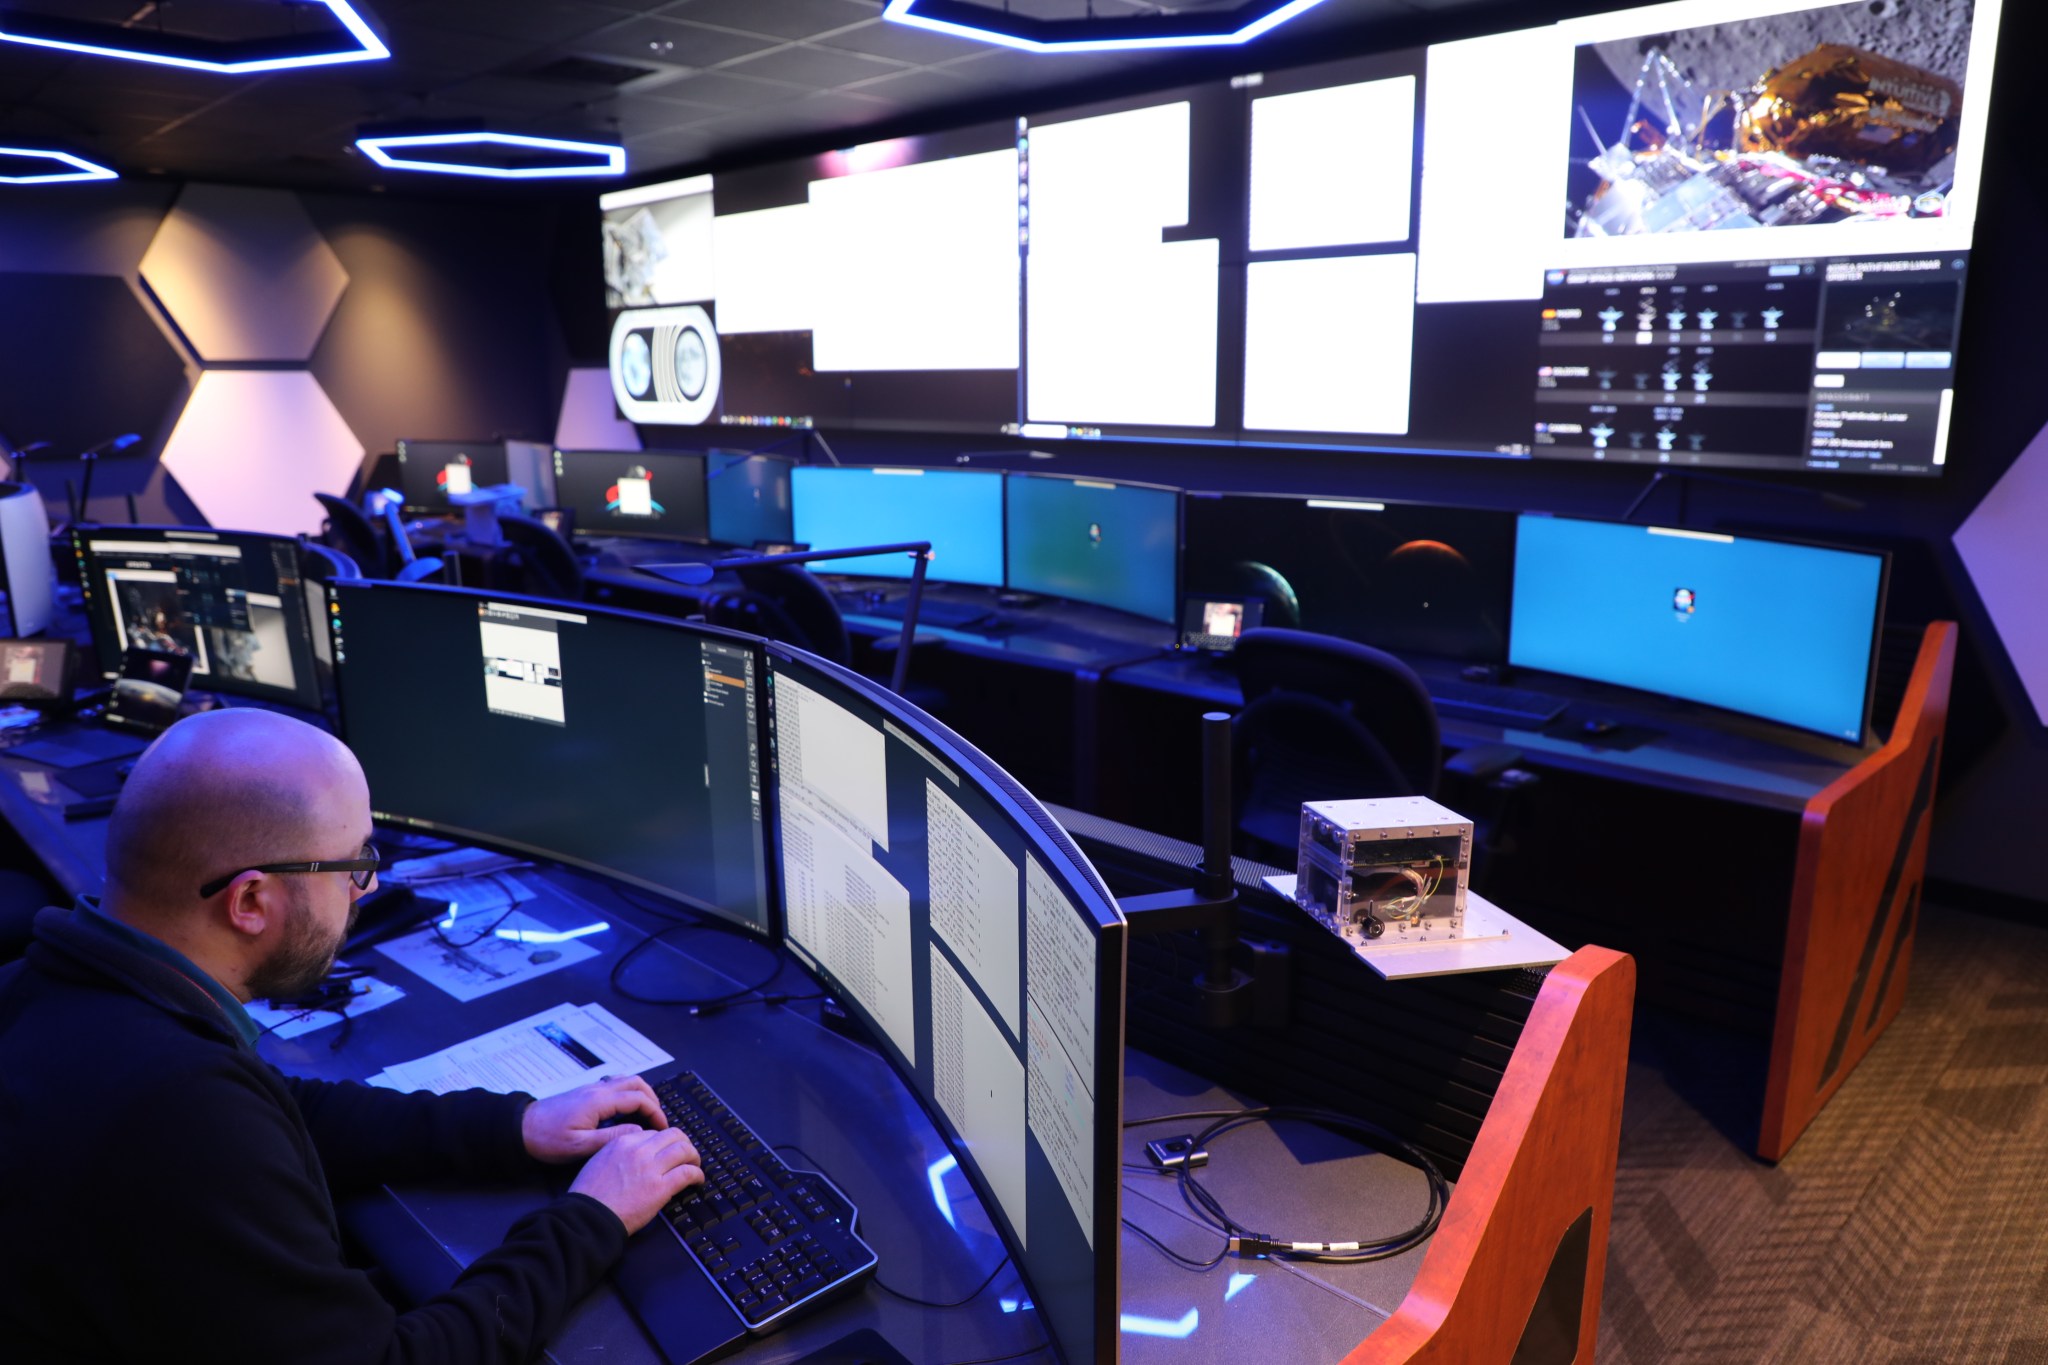 A man sits in front of a computer screen in a large control room with huge screens in the background.